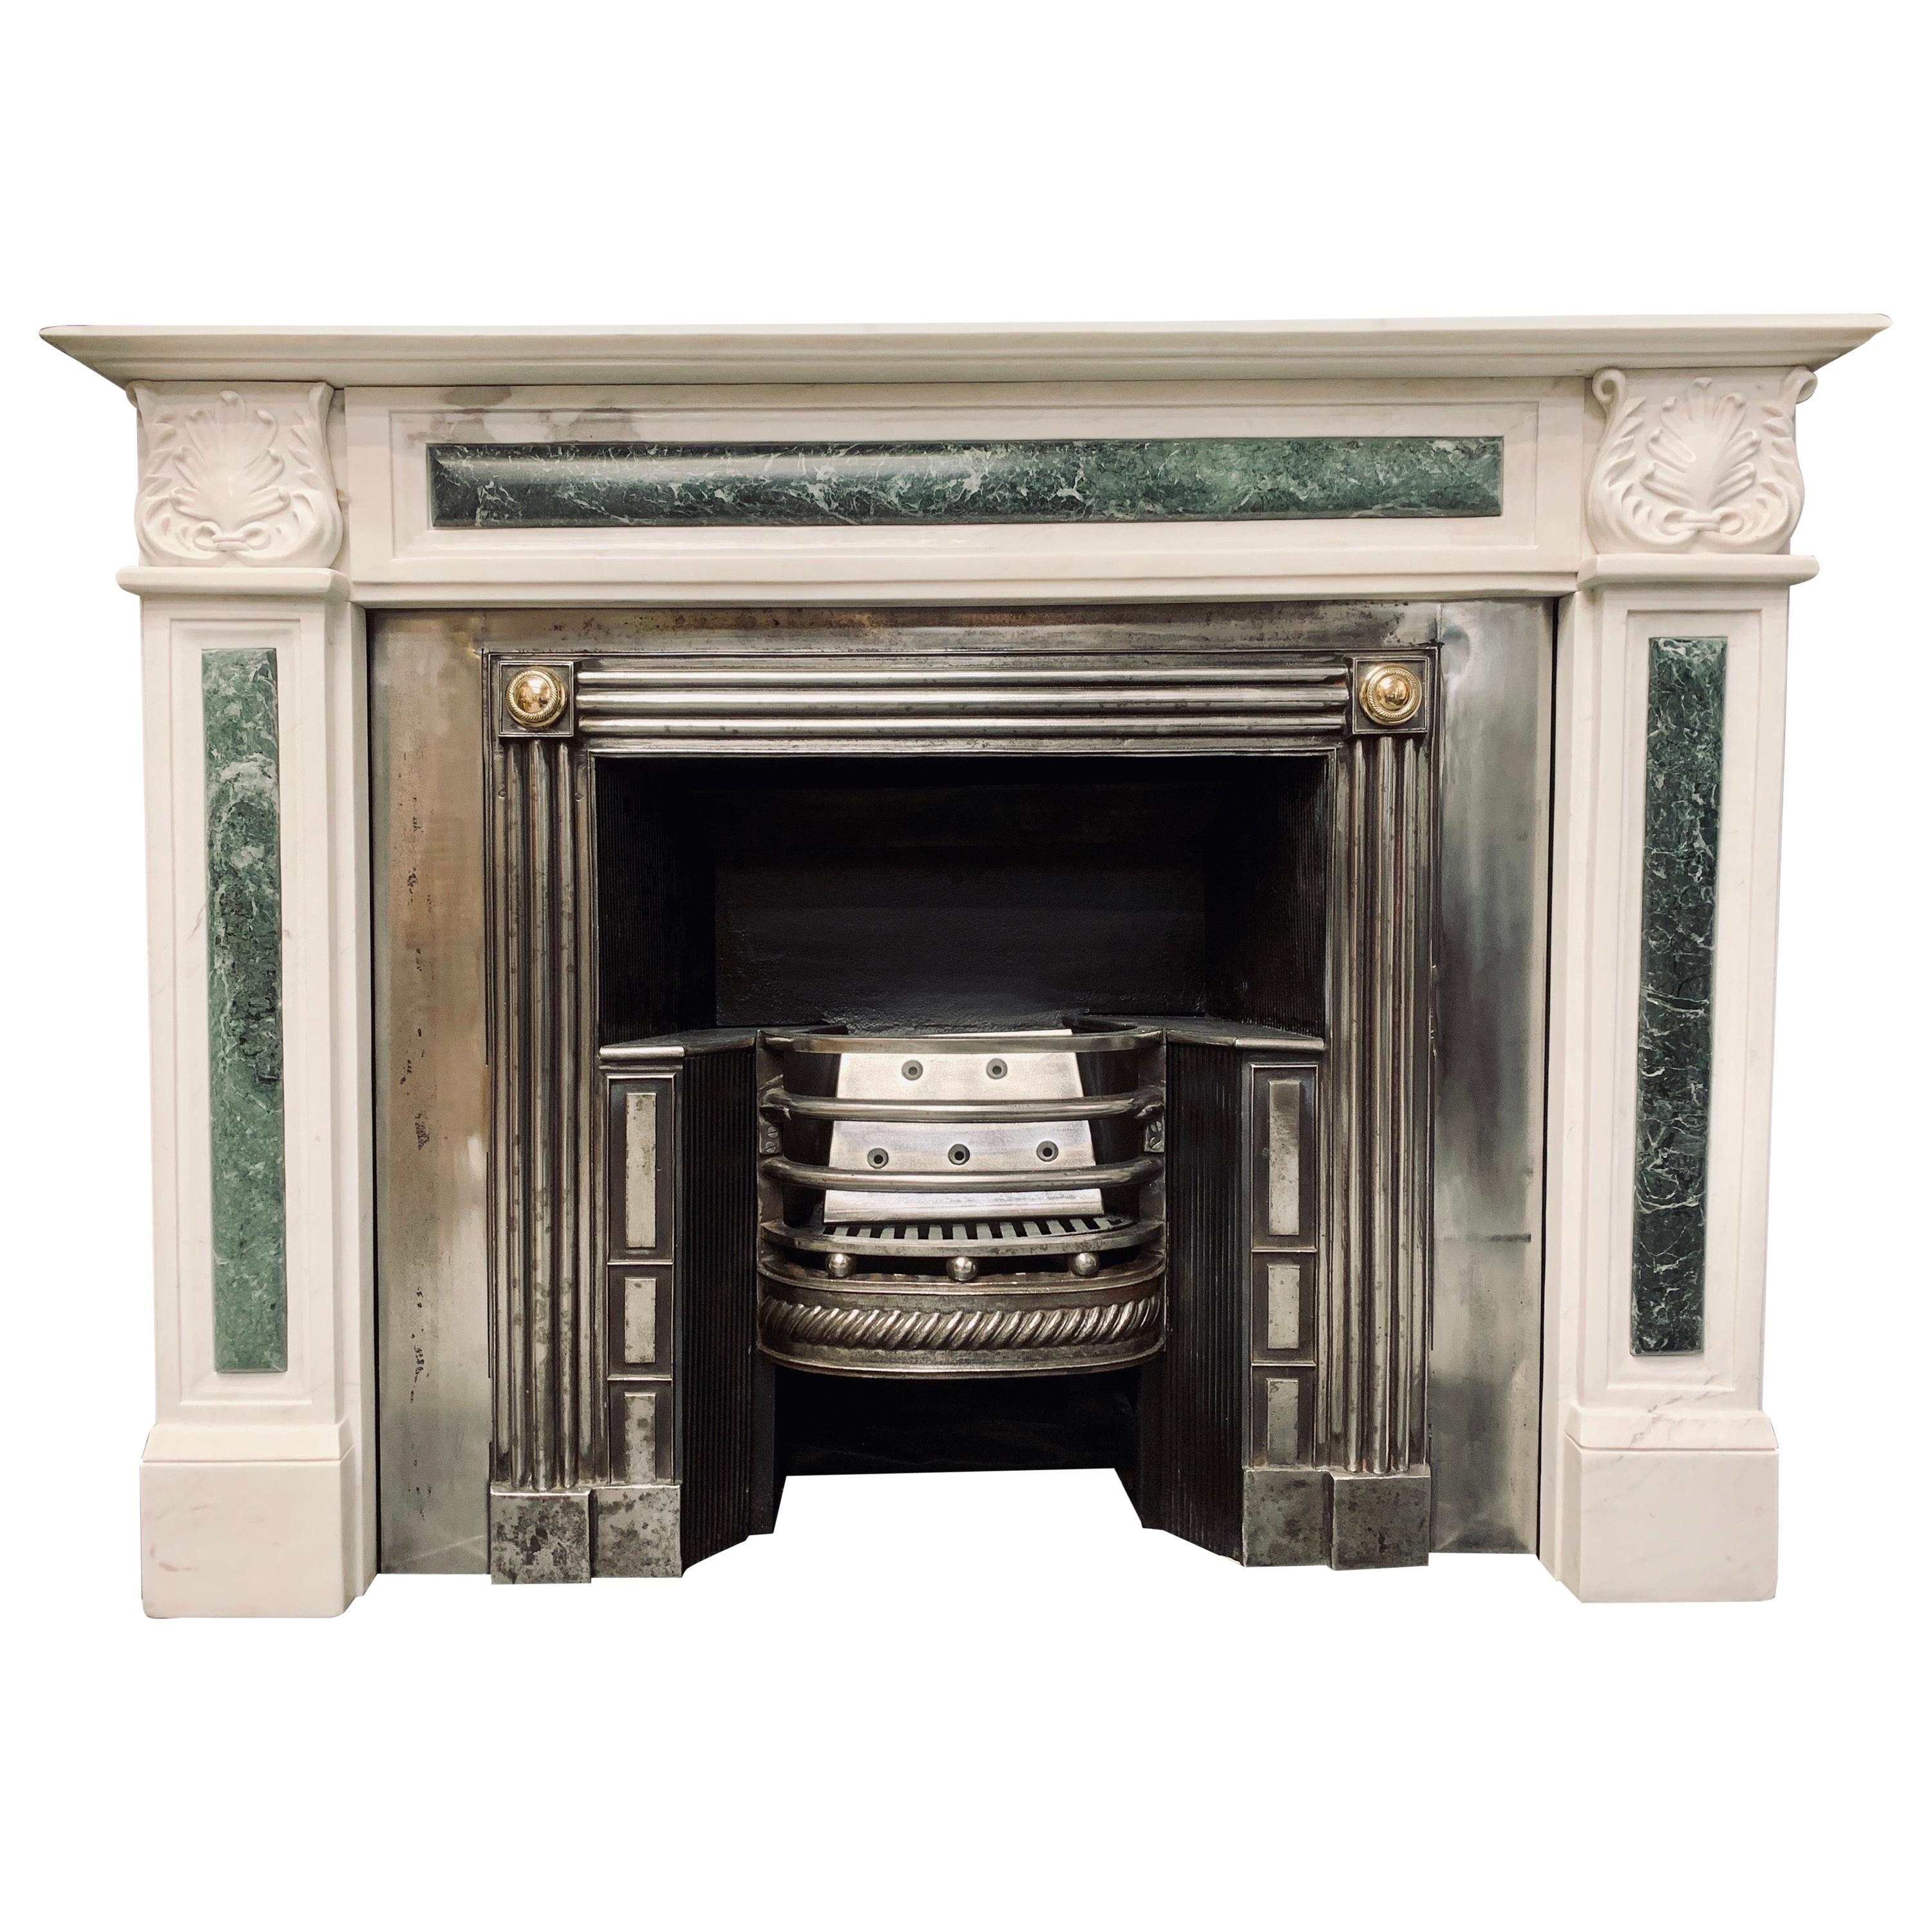 Period White Statuary Marble Fireplace Surround in the Regency Revival Manner